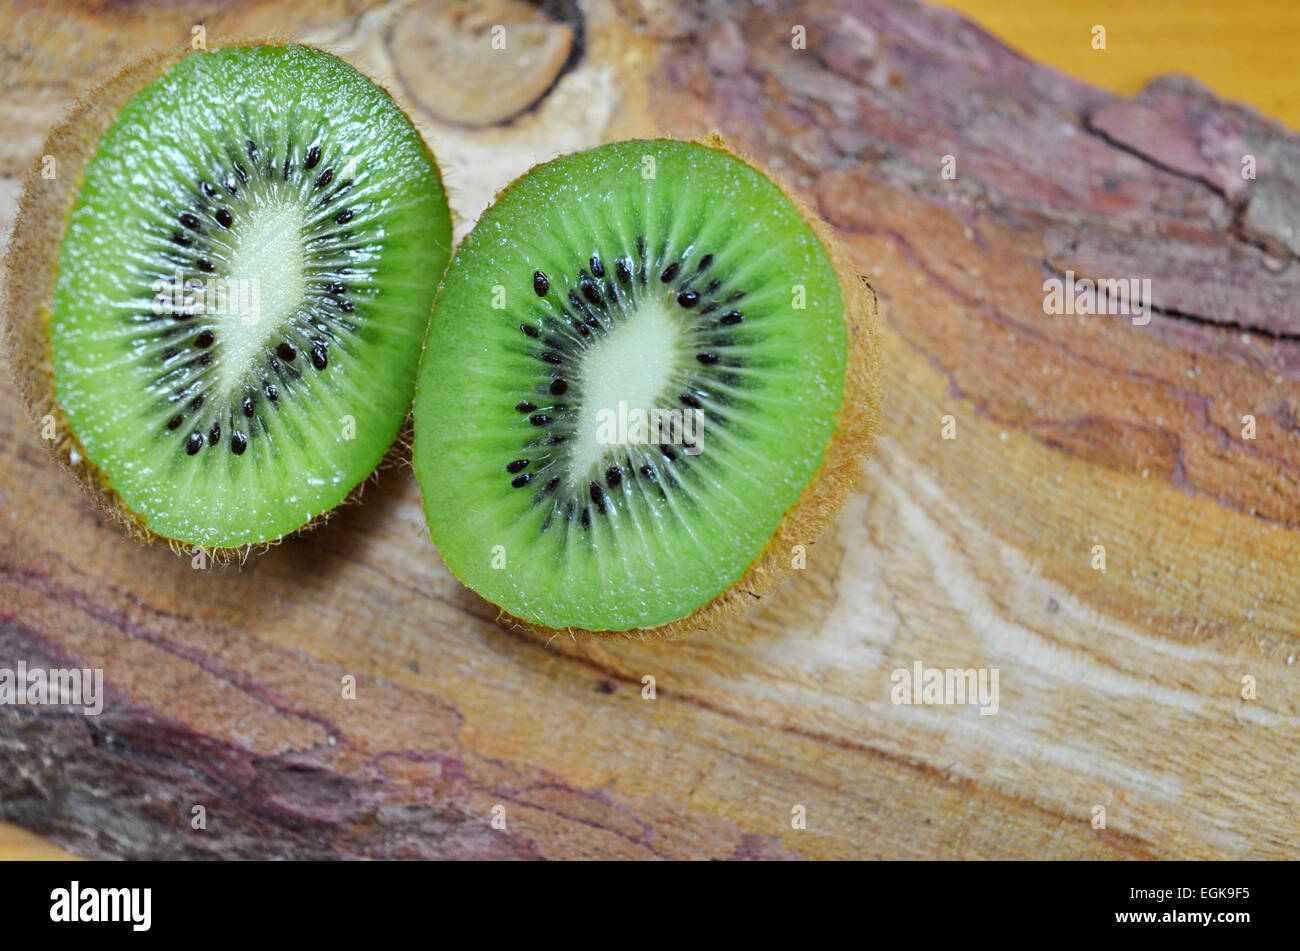 Juicy halved kiwi on a rustic wooden table Stock Photo